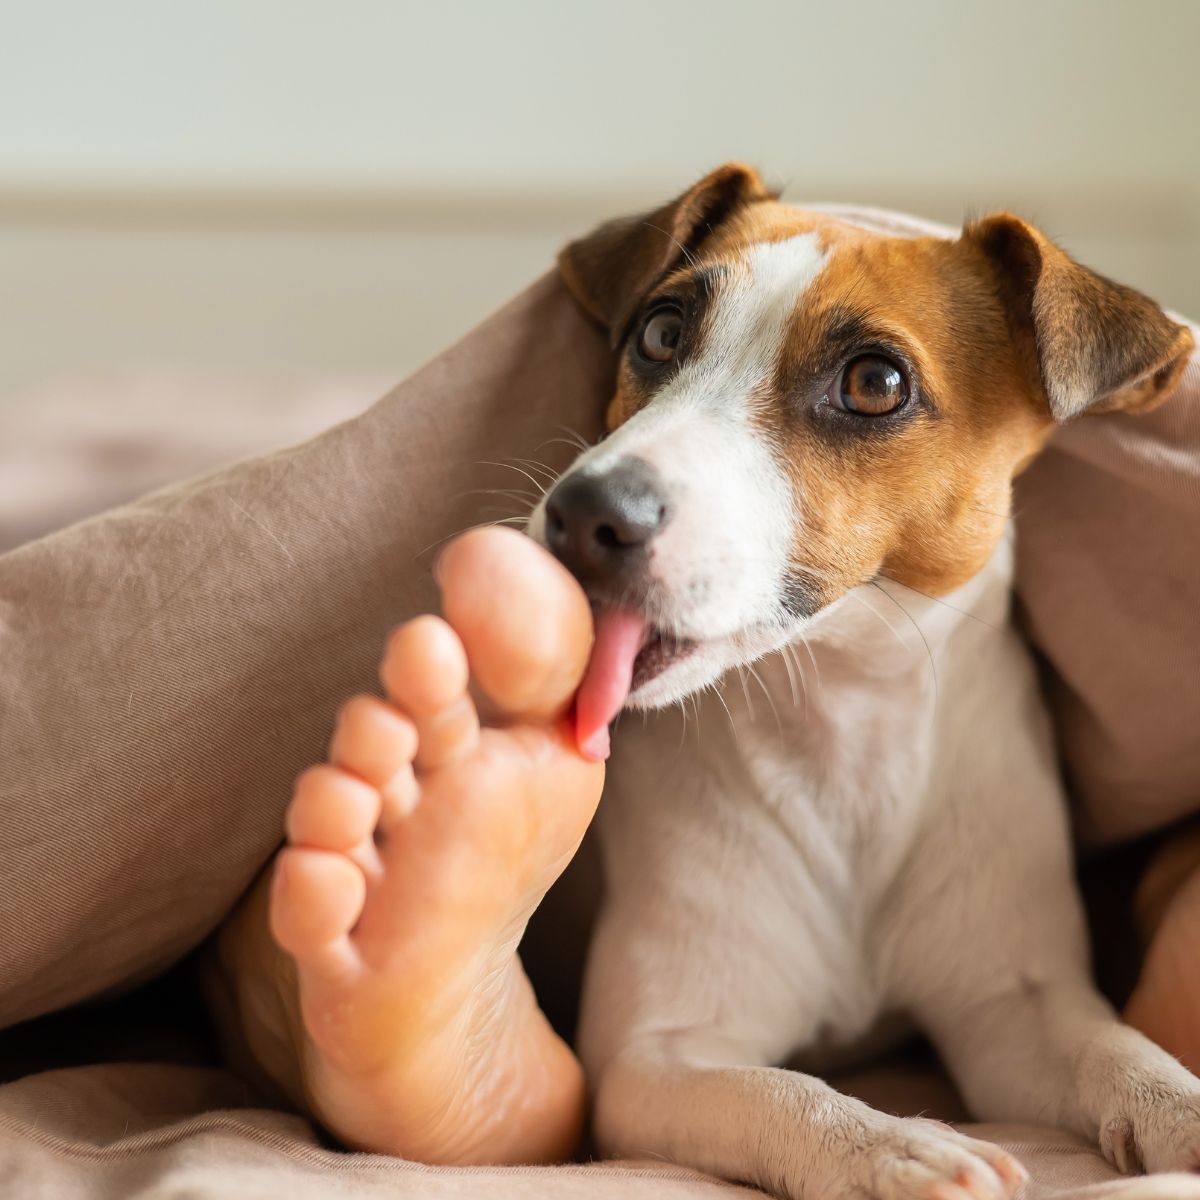 Why Do Dogs Lick Feet?